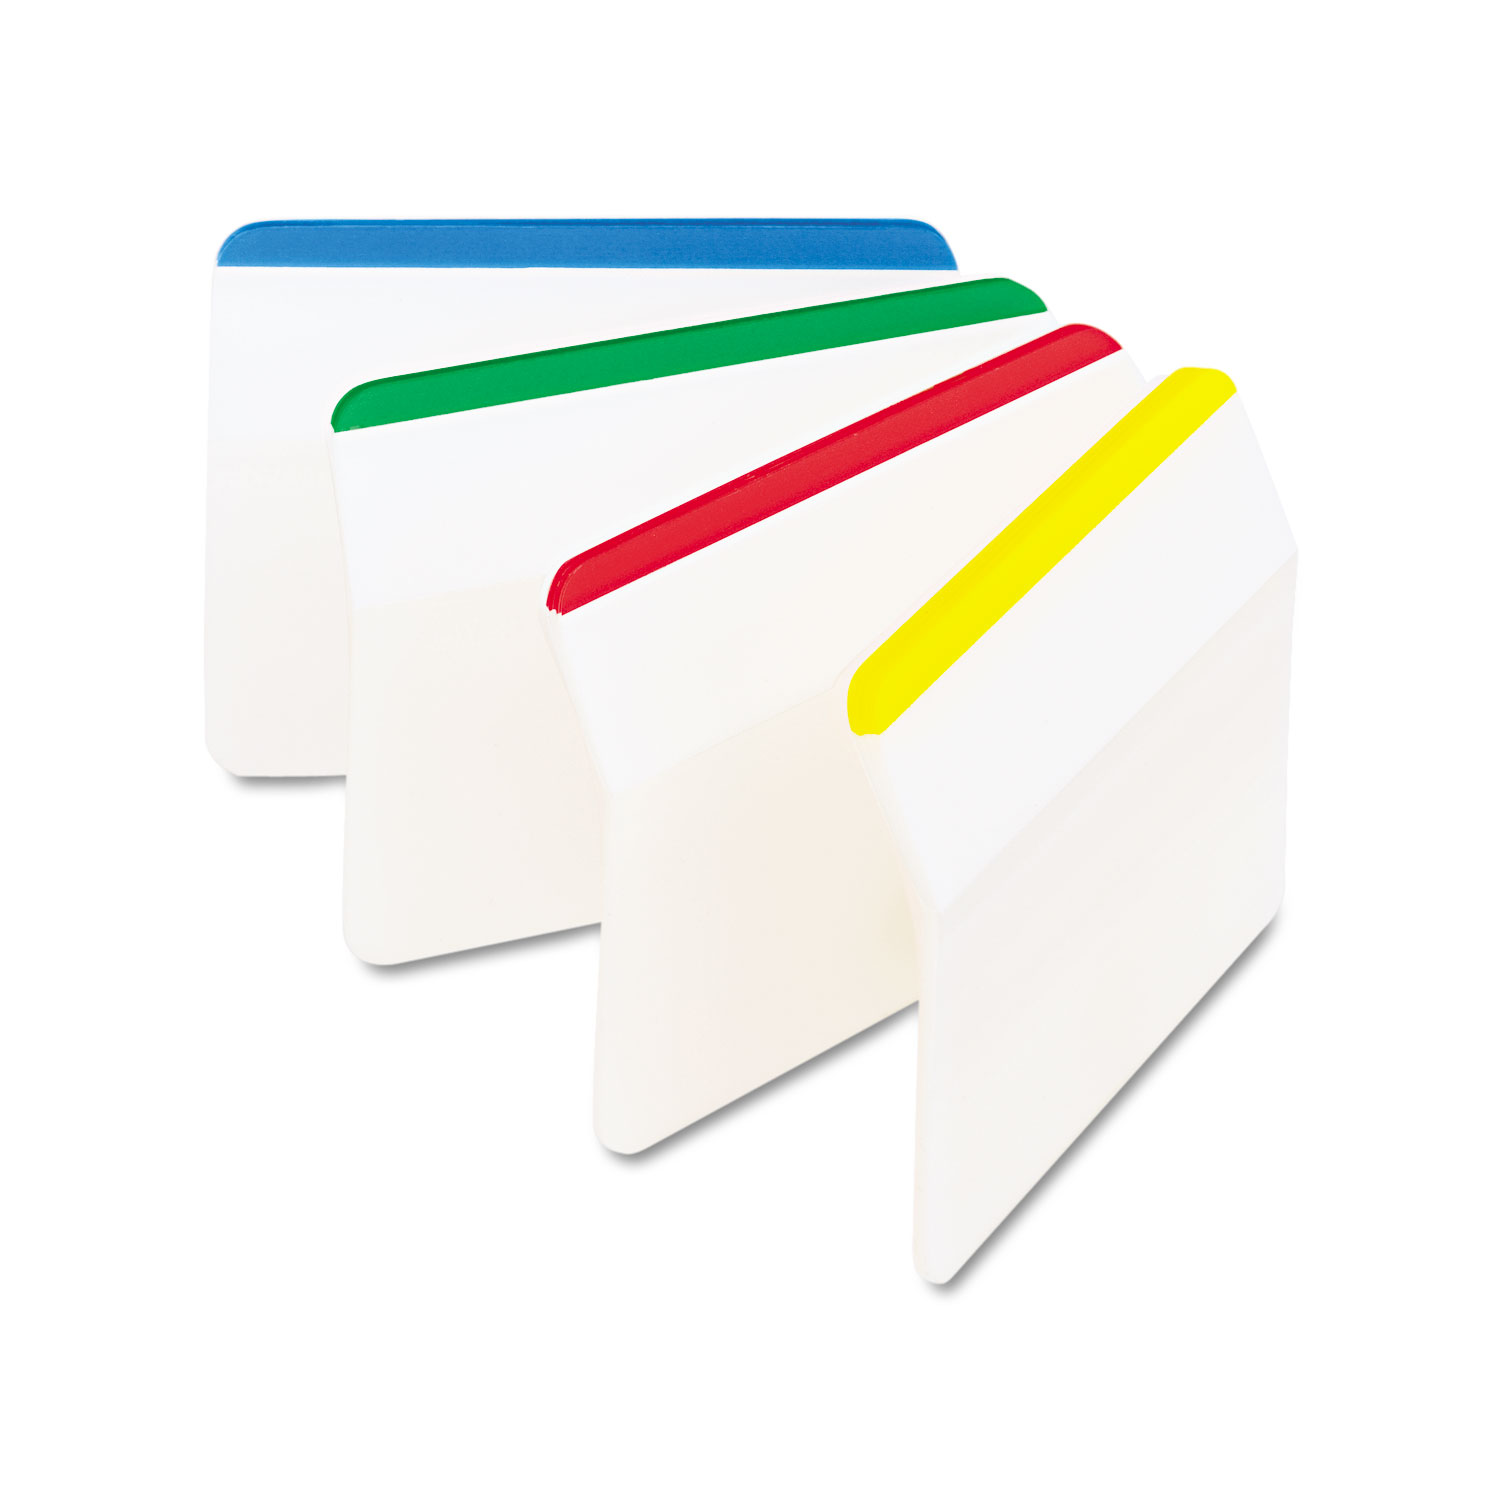 New Post-it Tabs 2 in Angled Lined 4 Colors Assorted Bright Colors 24 Tabs/Pack 6 Tabs/Color 